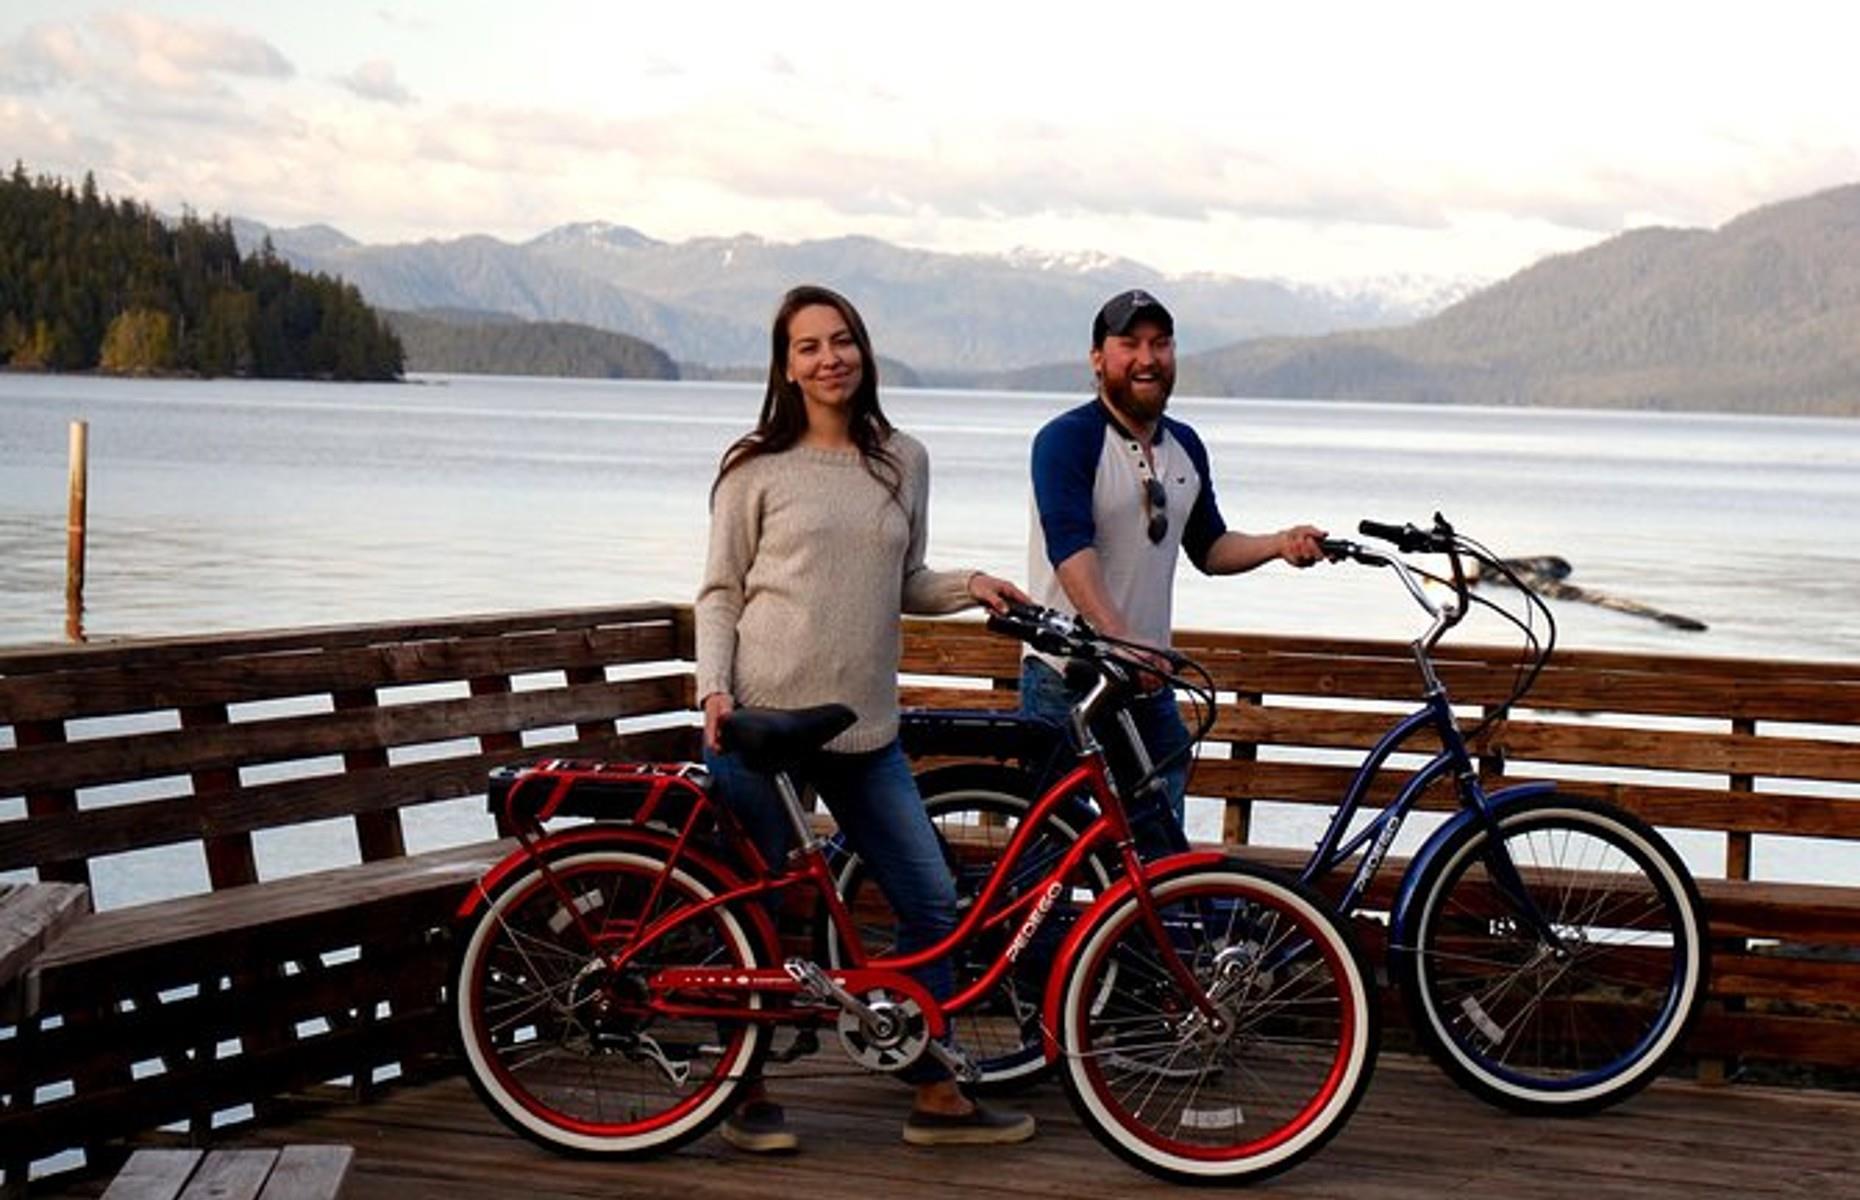 E-bikes are surging in popularity and for good reason: they allow you to travel further and faster without having to break much of a sweat. They’re an ideal and accessible way to see more of America – and these brilliant tours are a great place to start. From small-group adventure trips to guided city tours, here are our favorite e-bike tours throughout the US.